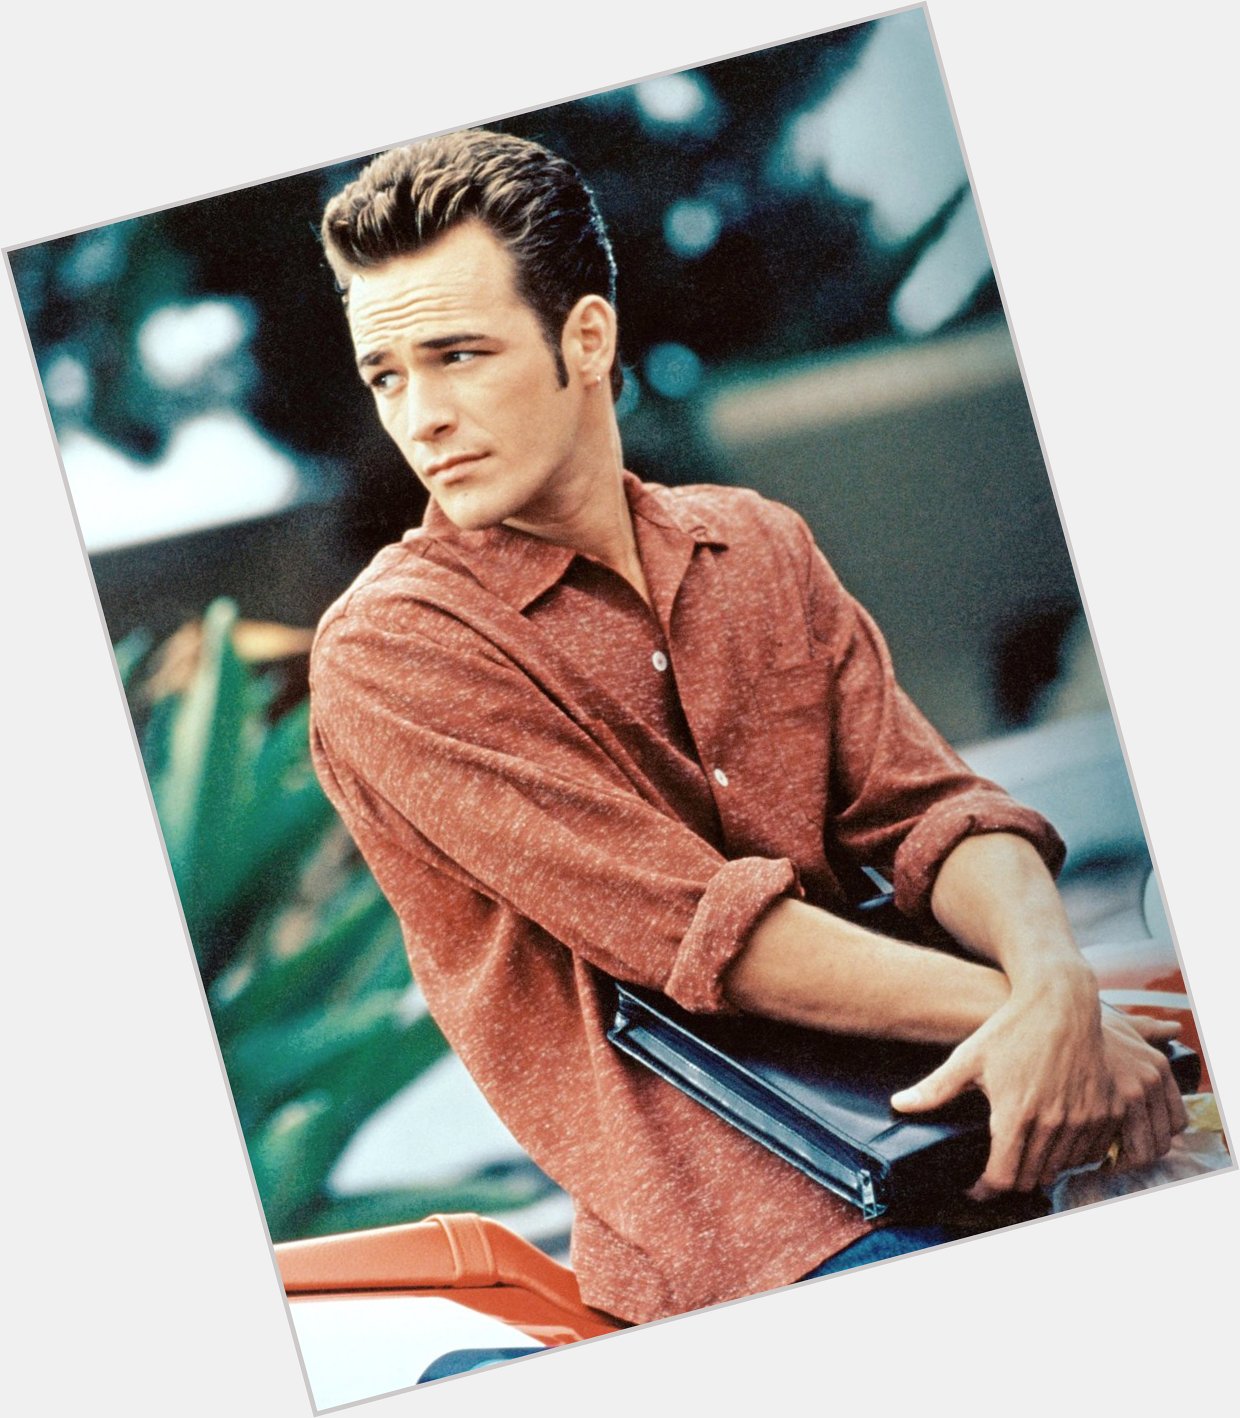 Luke Perry, born October 11, 1966, died May 4, 2019. We miss you Luke.Happy Birthday to you. 